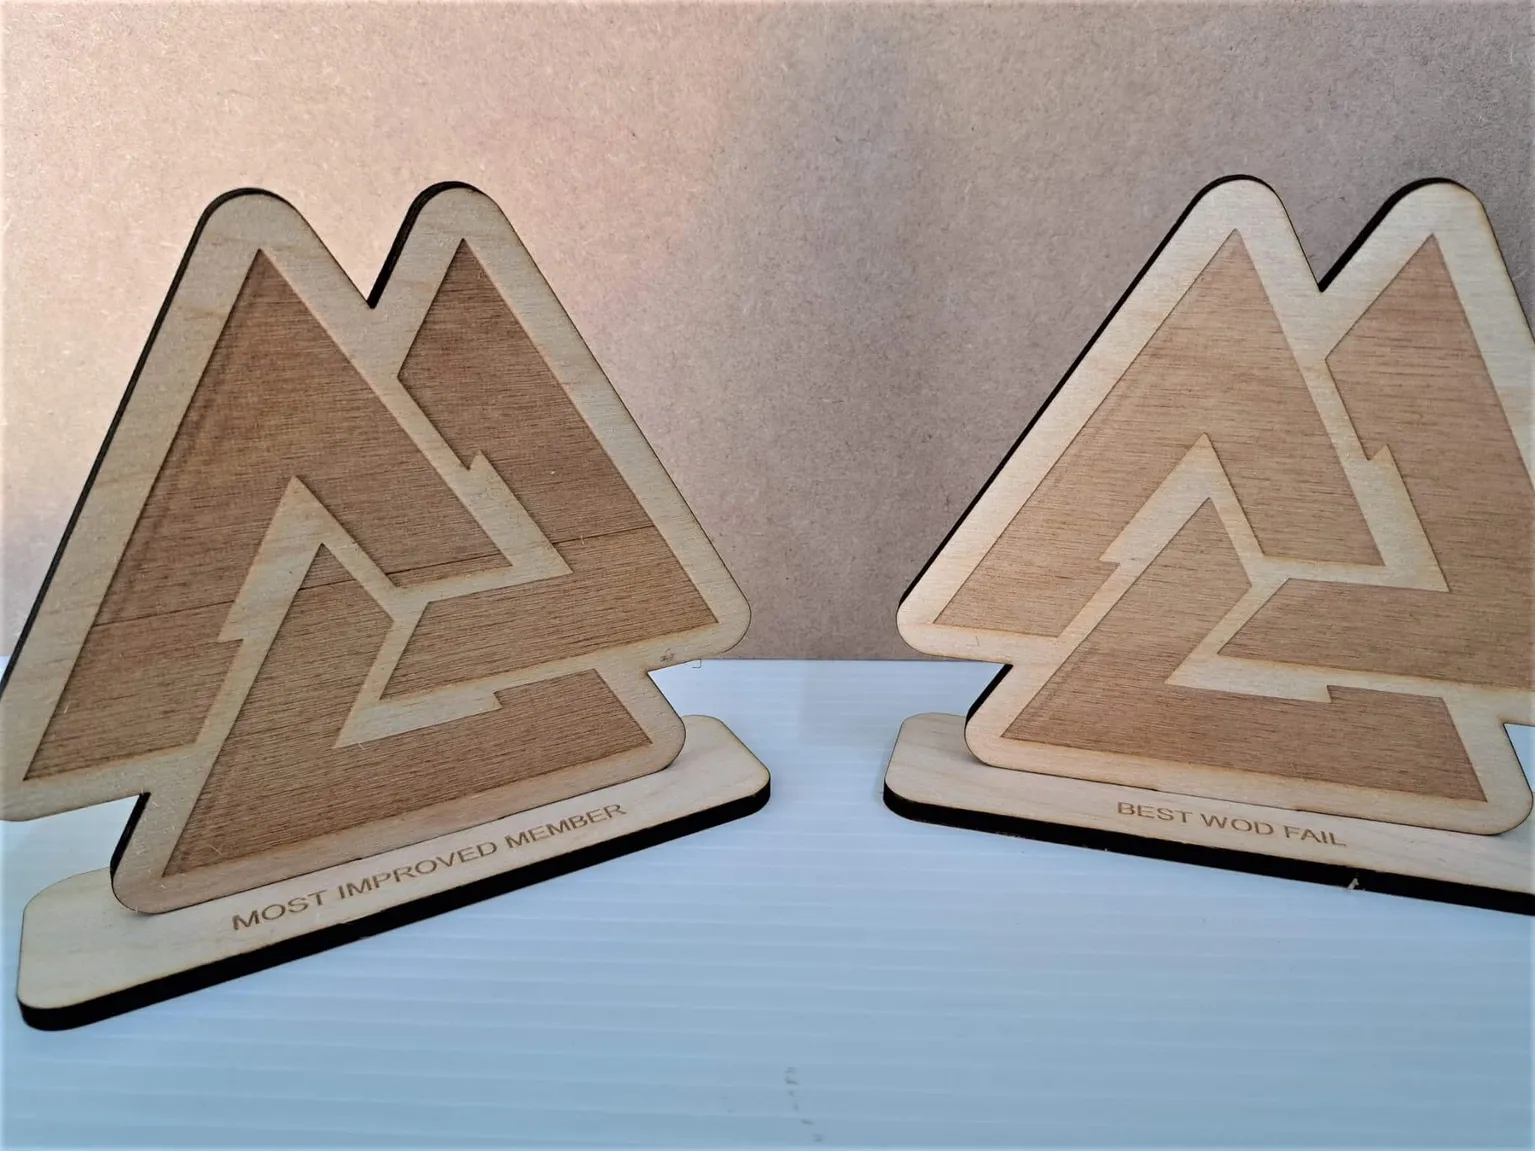 Two sustainable wooden plaques with a triangle design on them.